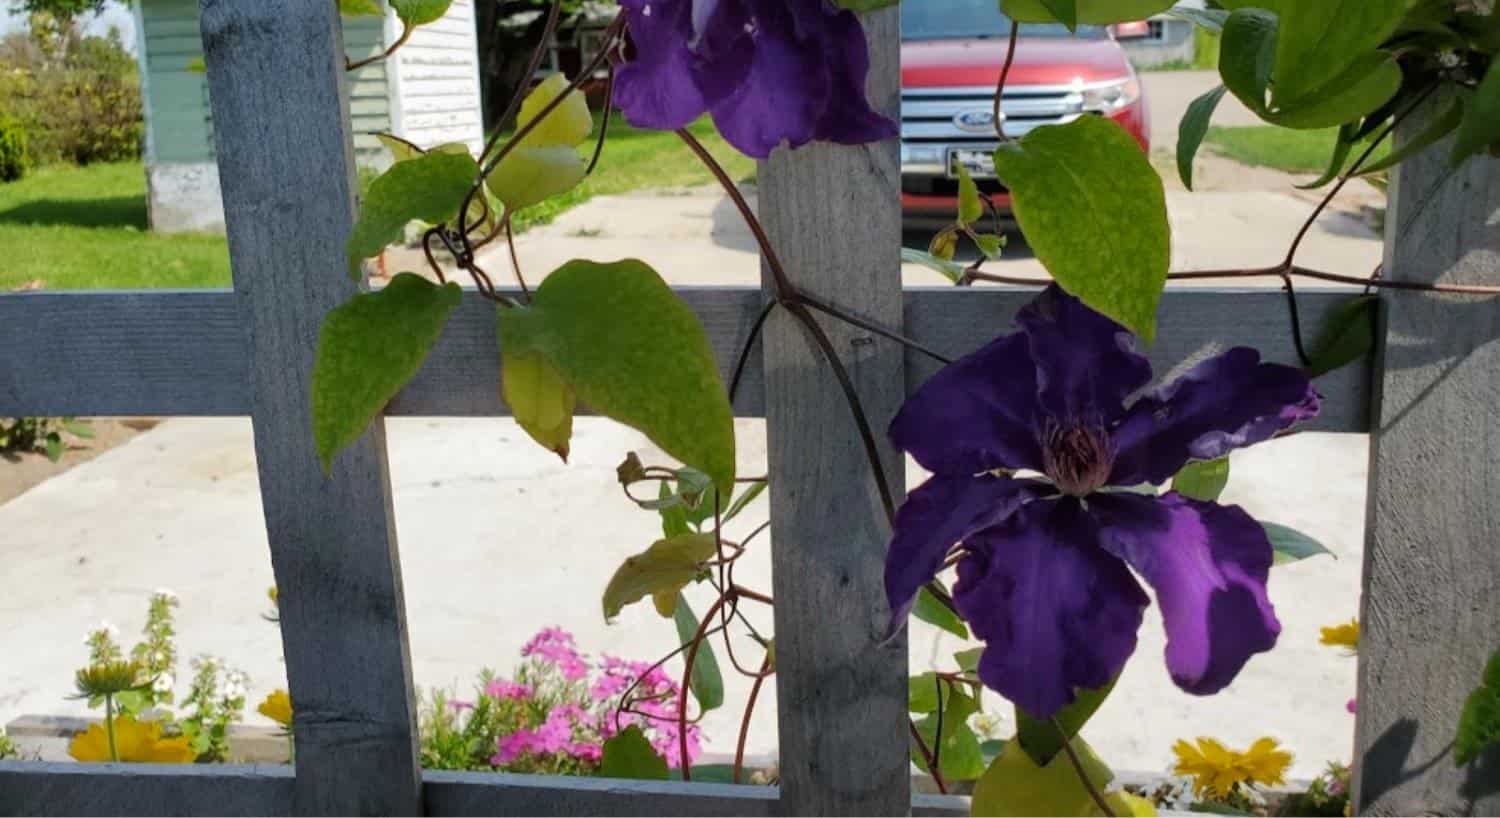 Close up view of a trellis with purple flowers growing up it